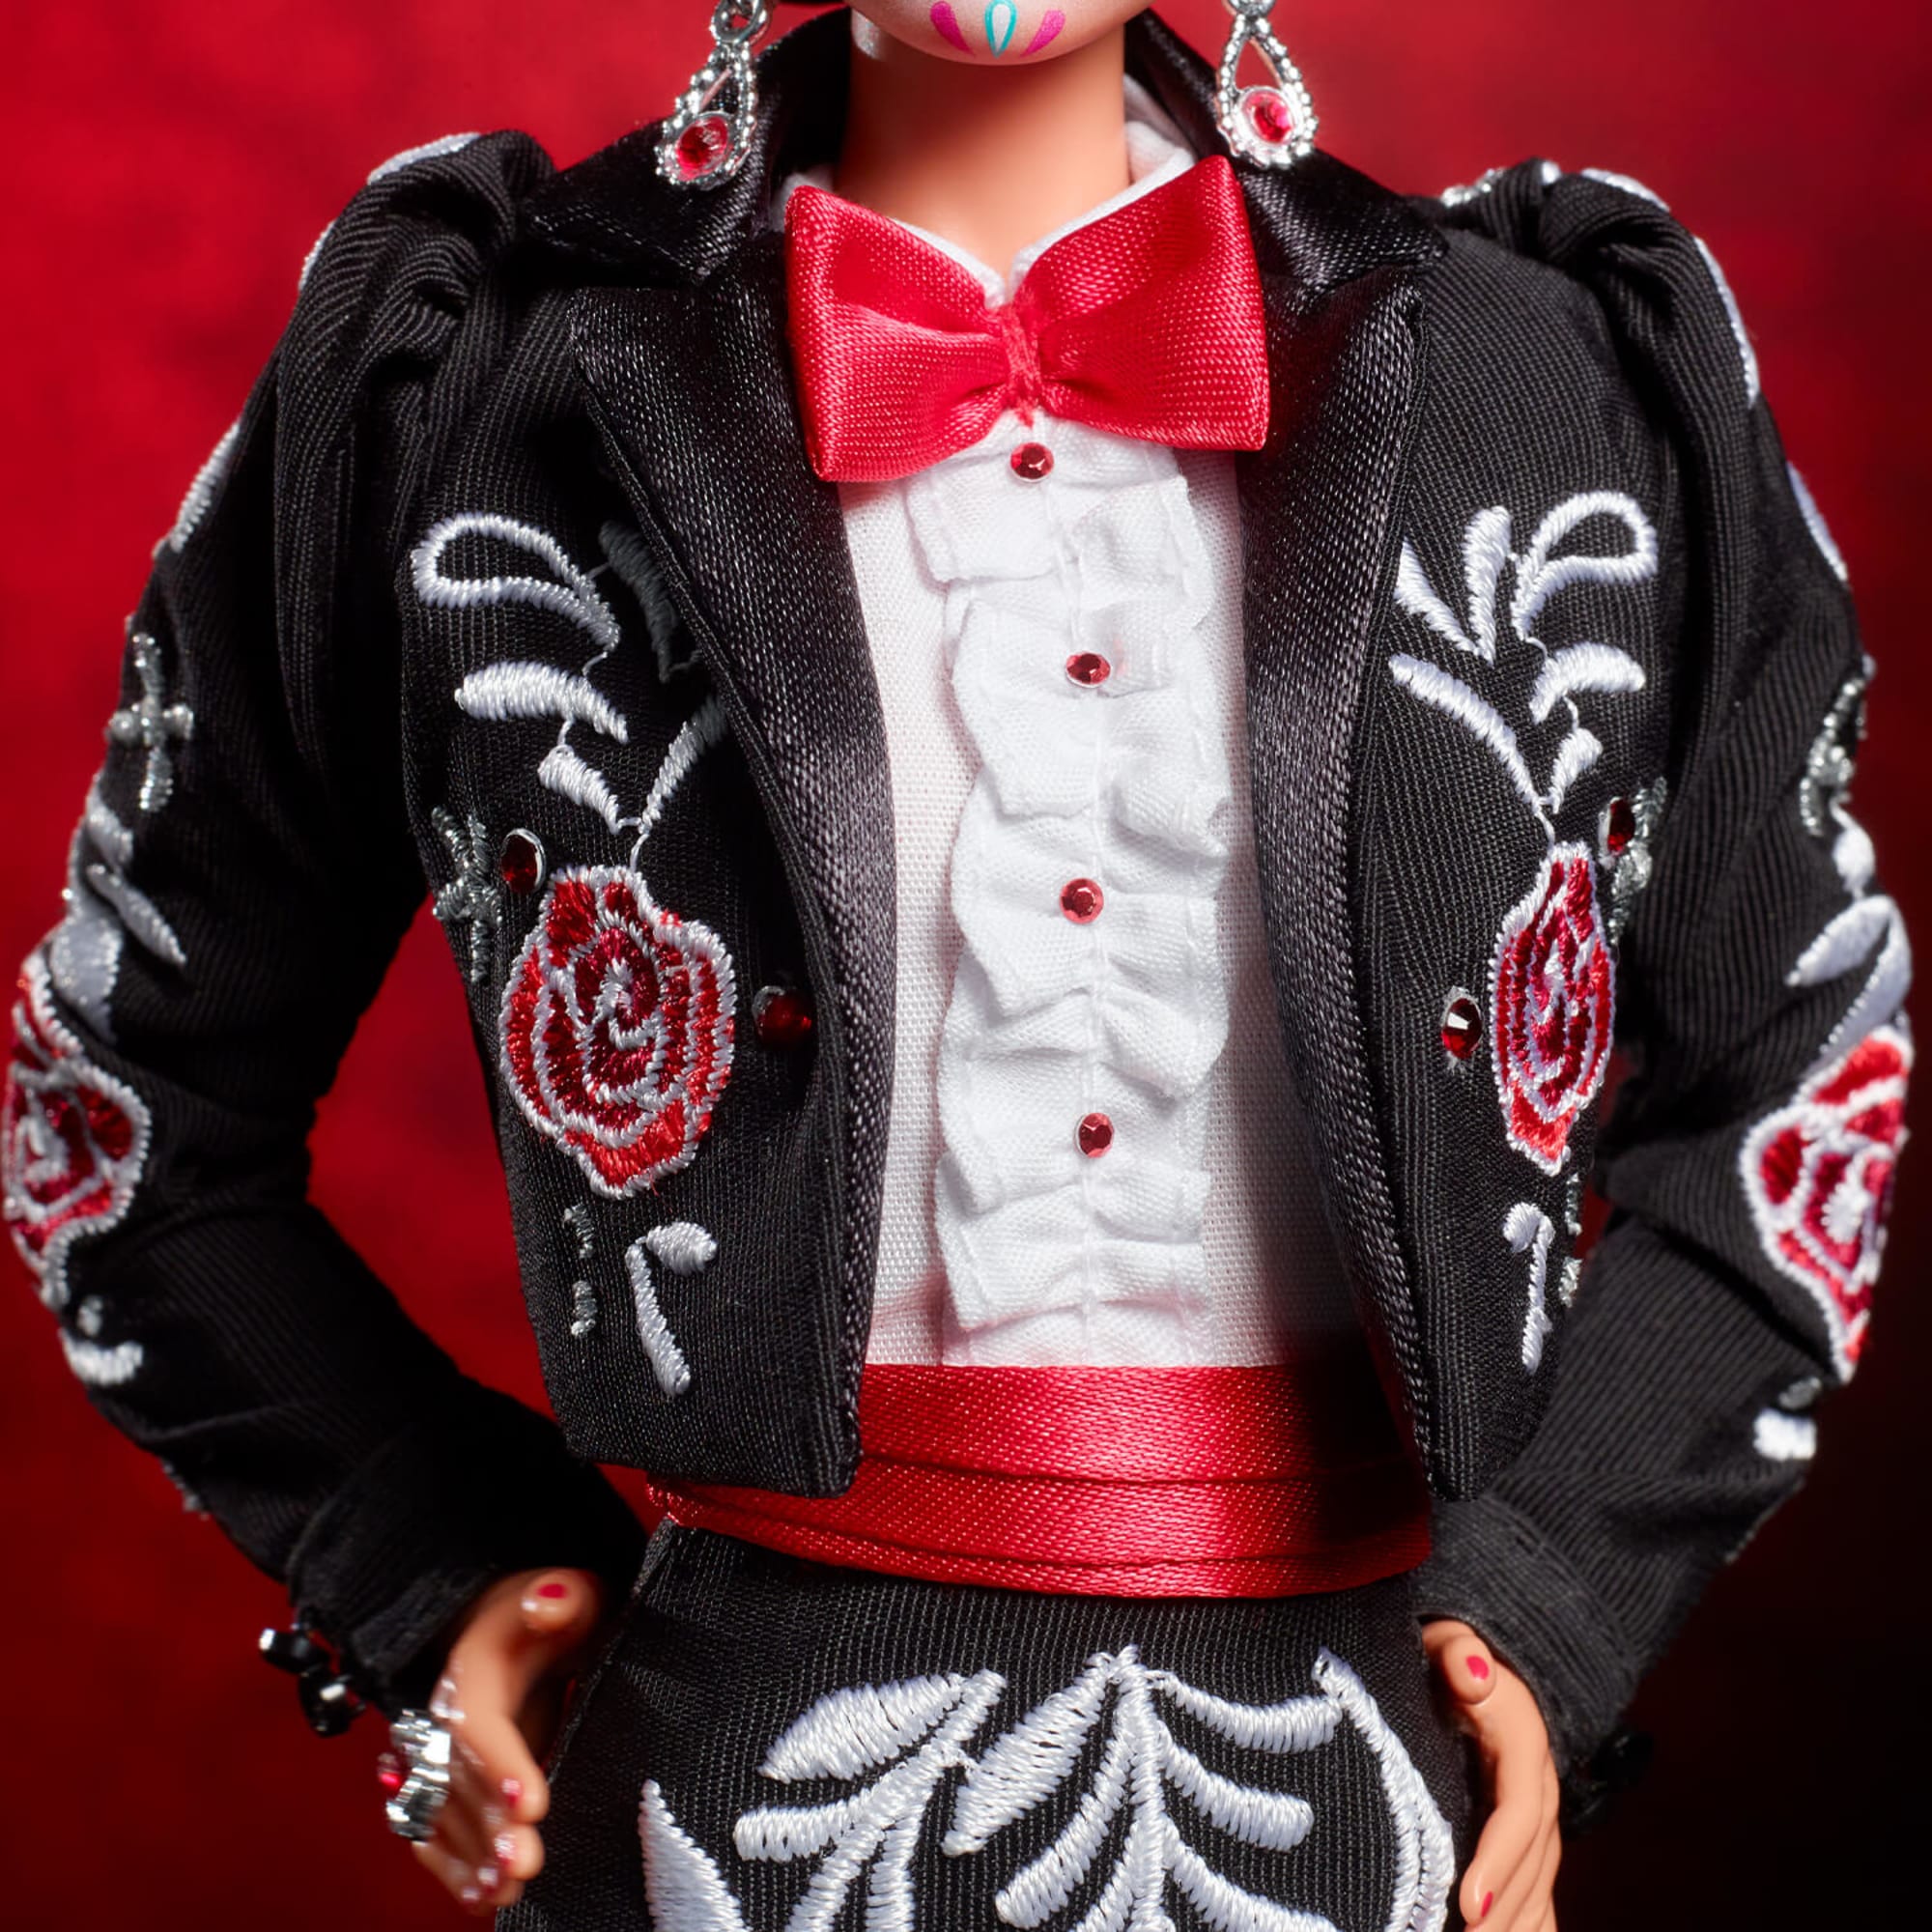 Mattel - Barbie Collector Dia de Muertos Doll 2022, Limited Edition [New  Toy]